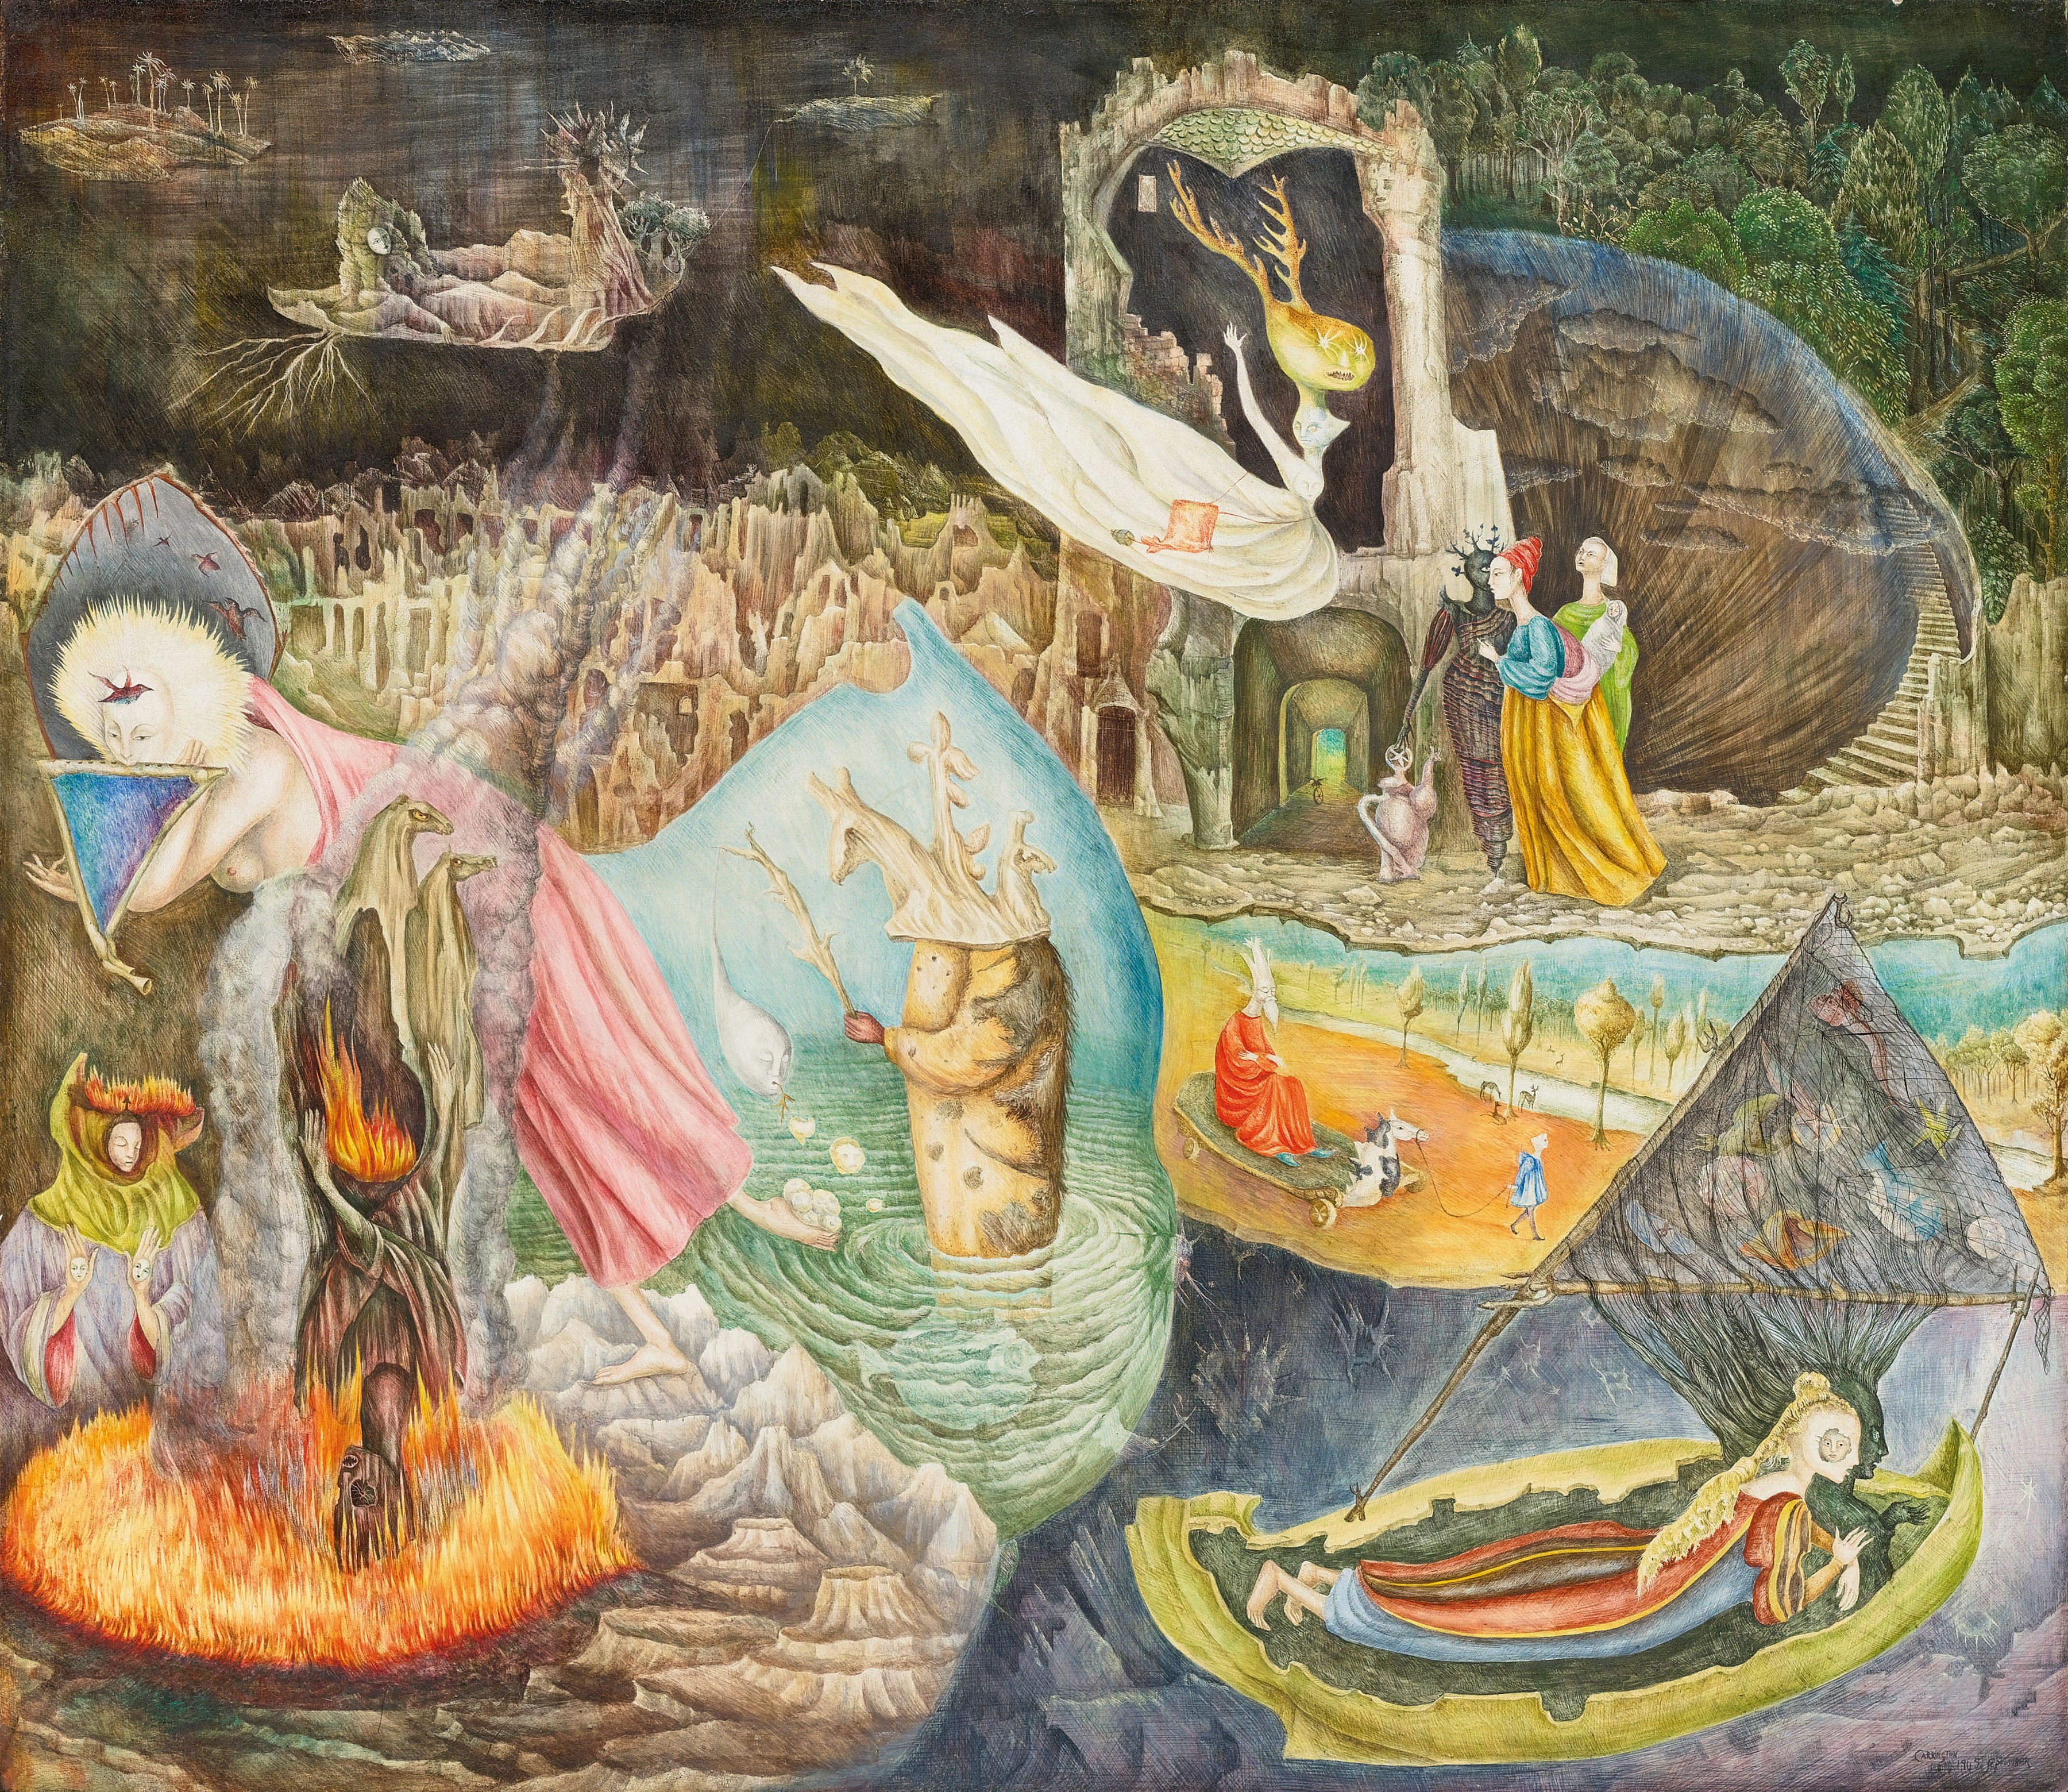 Leonora Carrington. Les Distractions de Dagobert. 1945. Tempera on Masonite, 74.9 by 86.7 cm (29&frac12; by 34⅛ in.). Private Collection &copy; 2019 Leonora Carrington / Artists Rights Society (ARS), New York